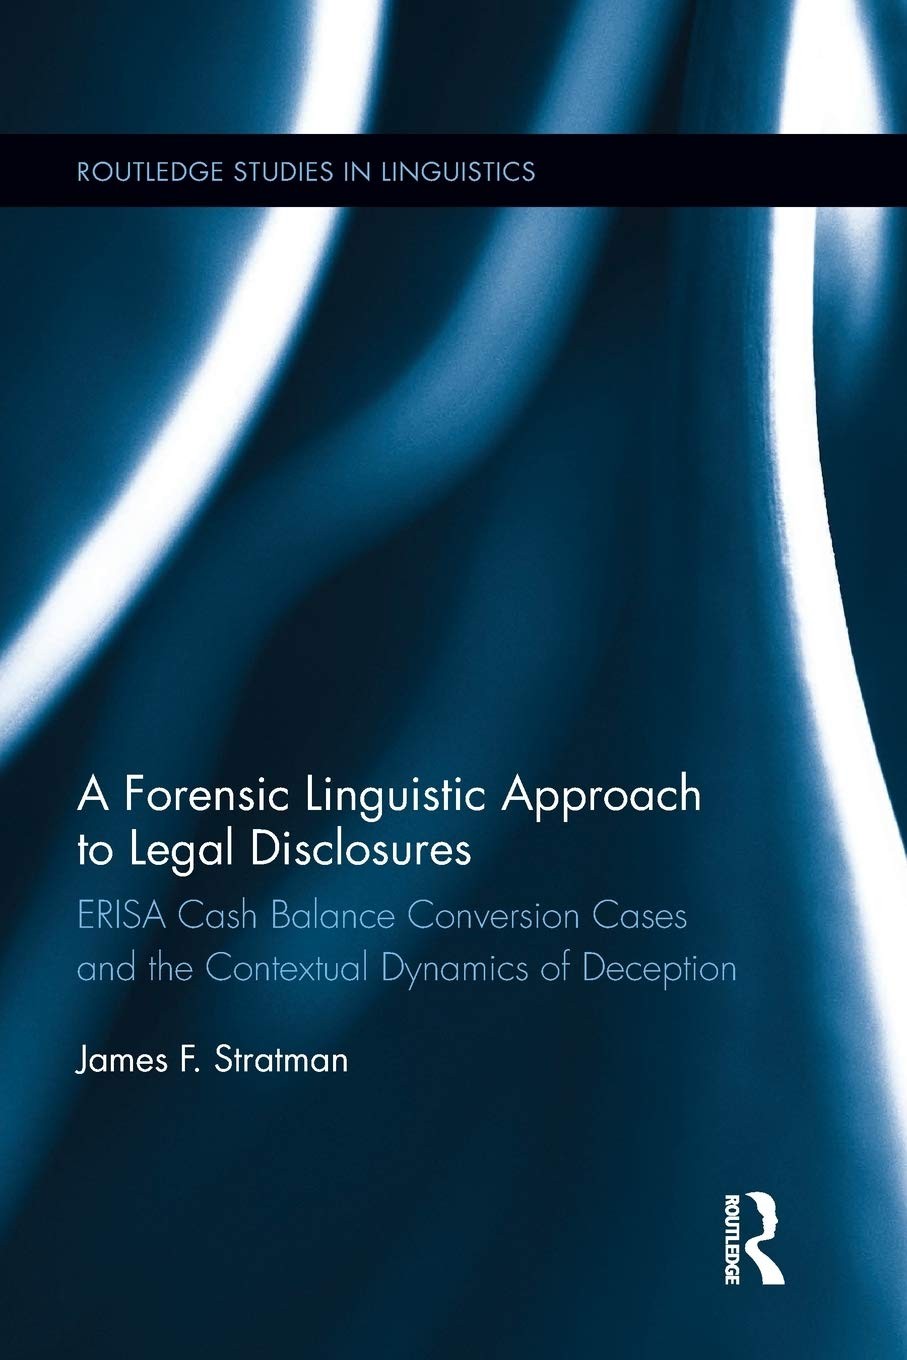 A Forensic Linguistic Approach to Legal Disclosures: ERISA Cash Balance Conversion Cases and the Contextual Dynamics of Deception